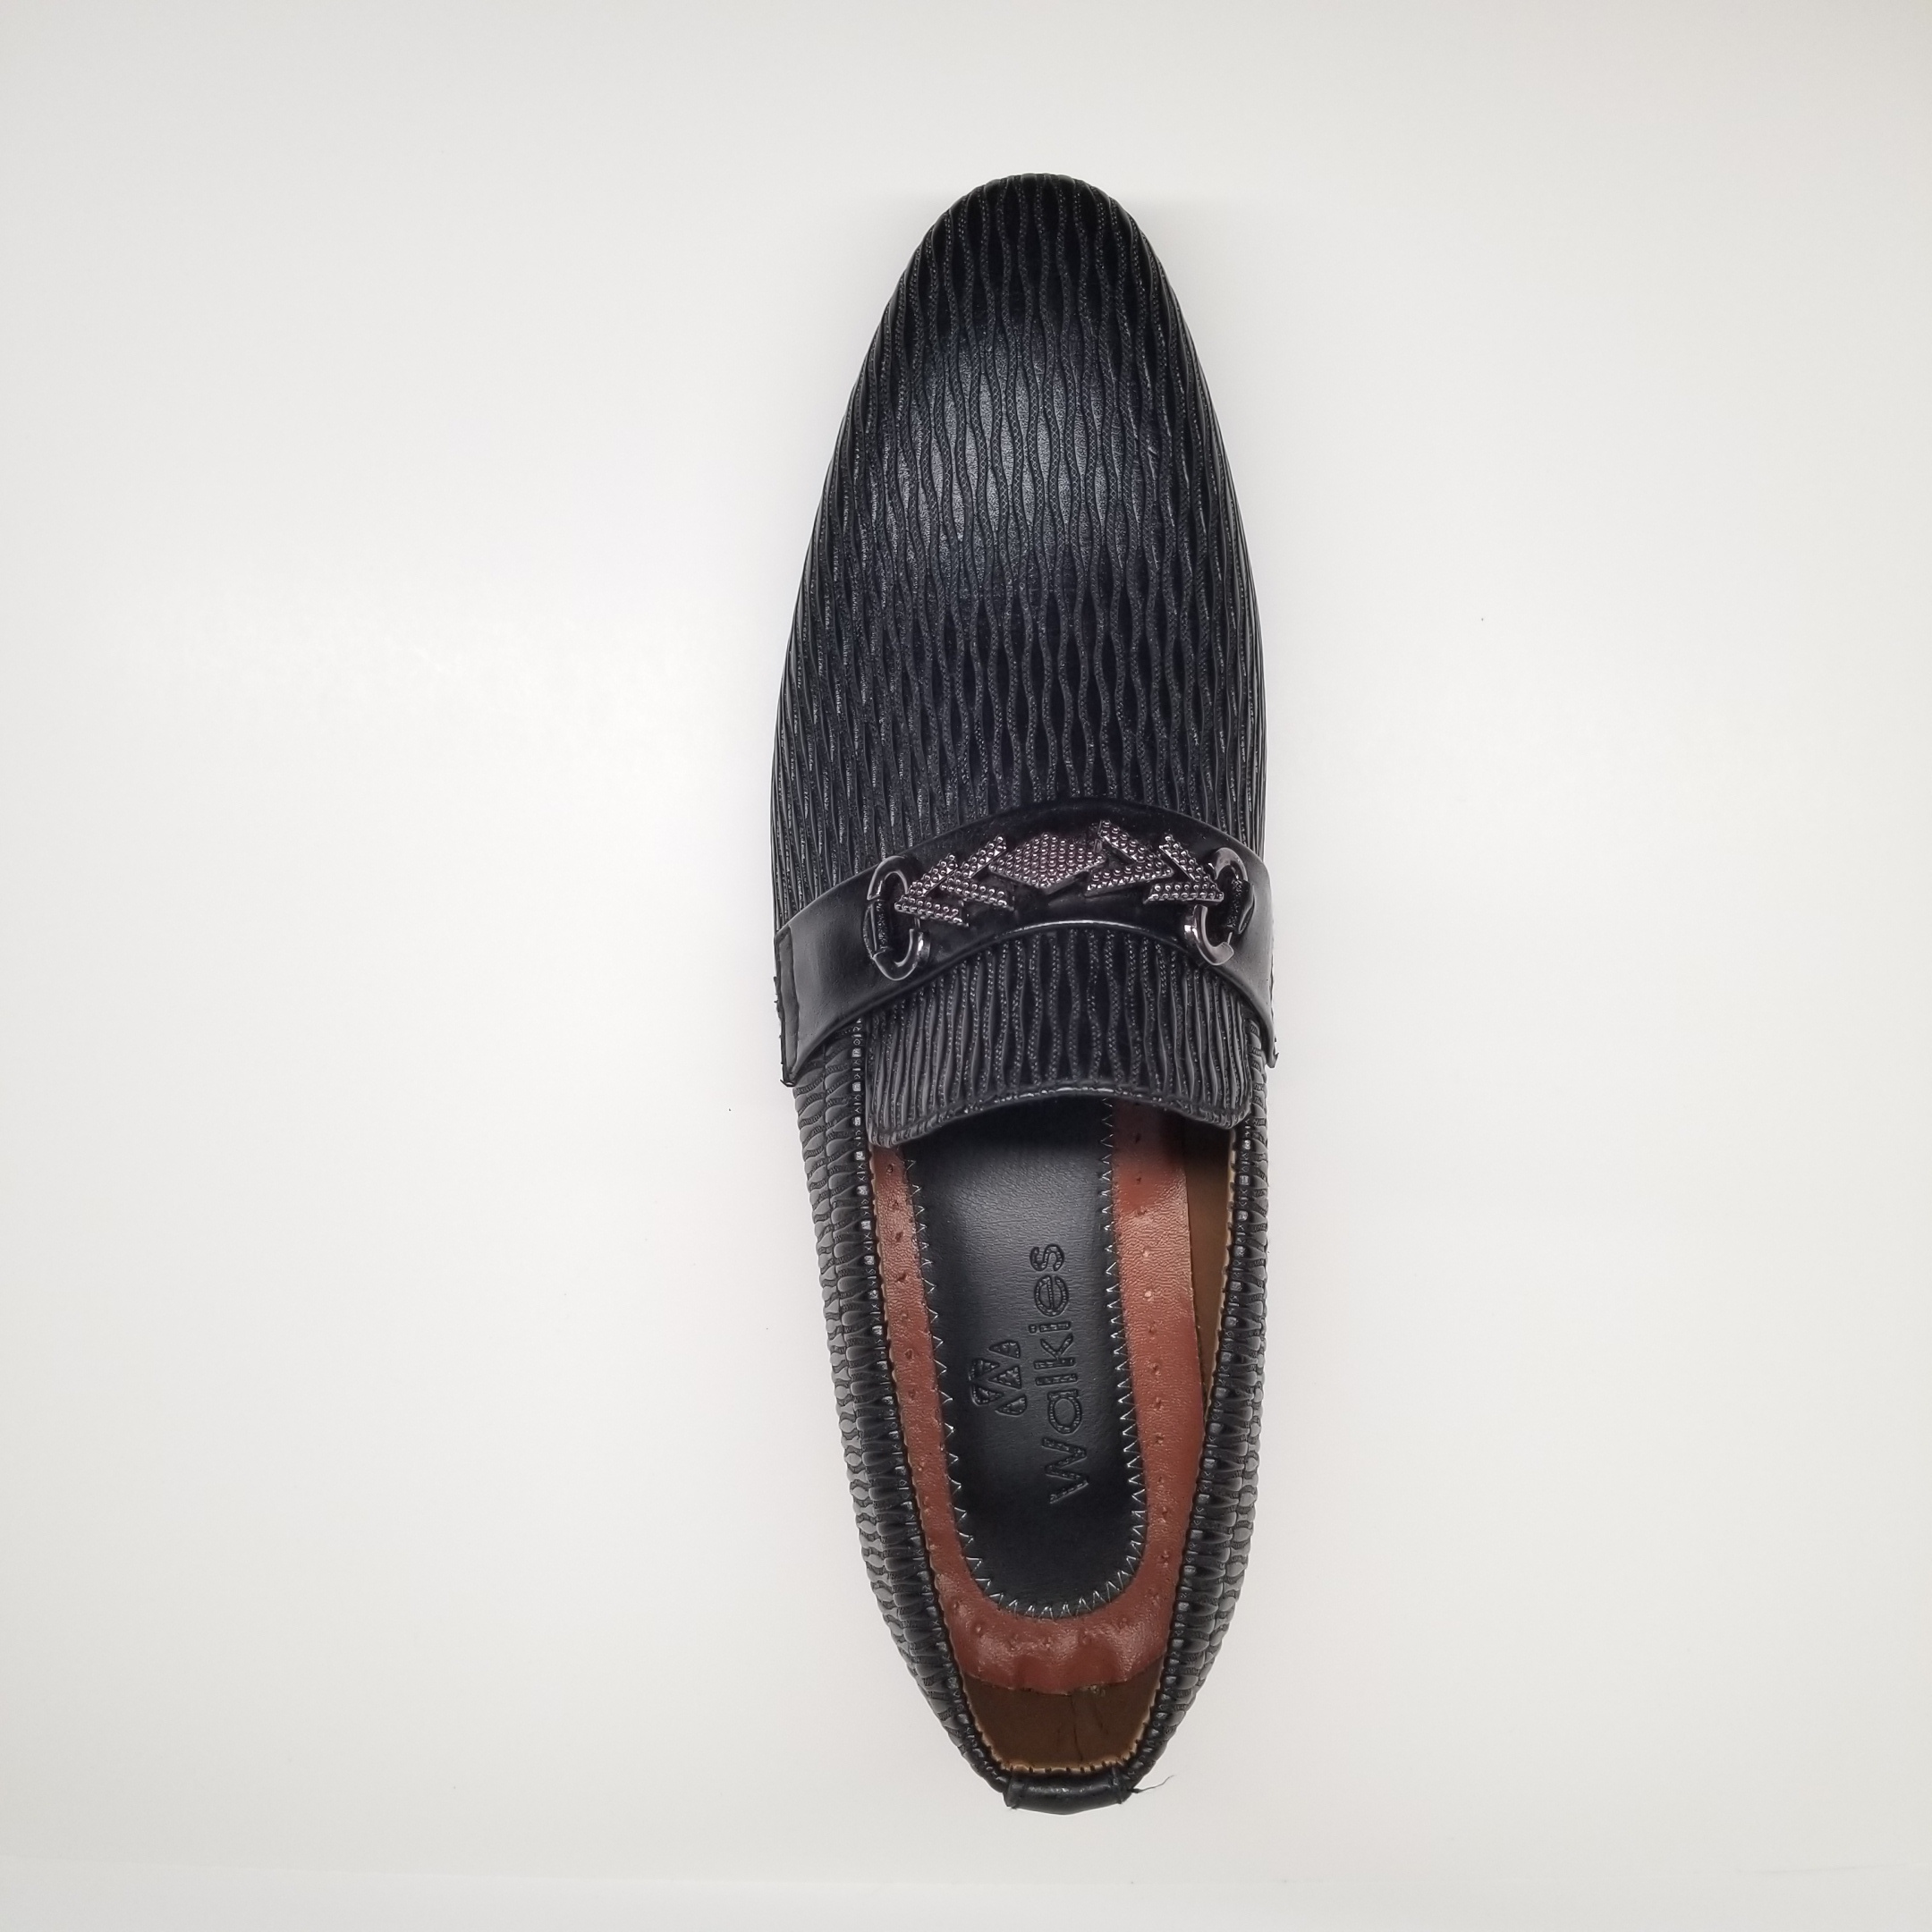 Conquer dress shoes by Walkies at NMFootwear.com